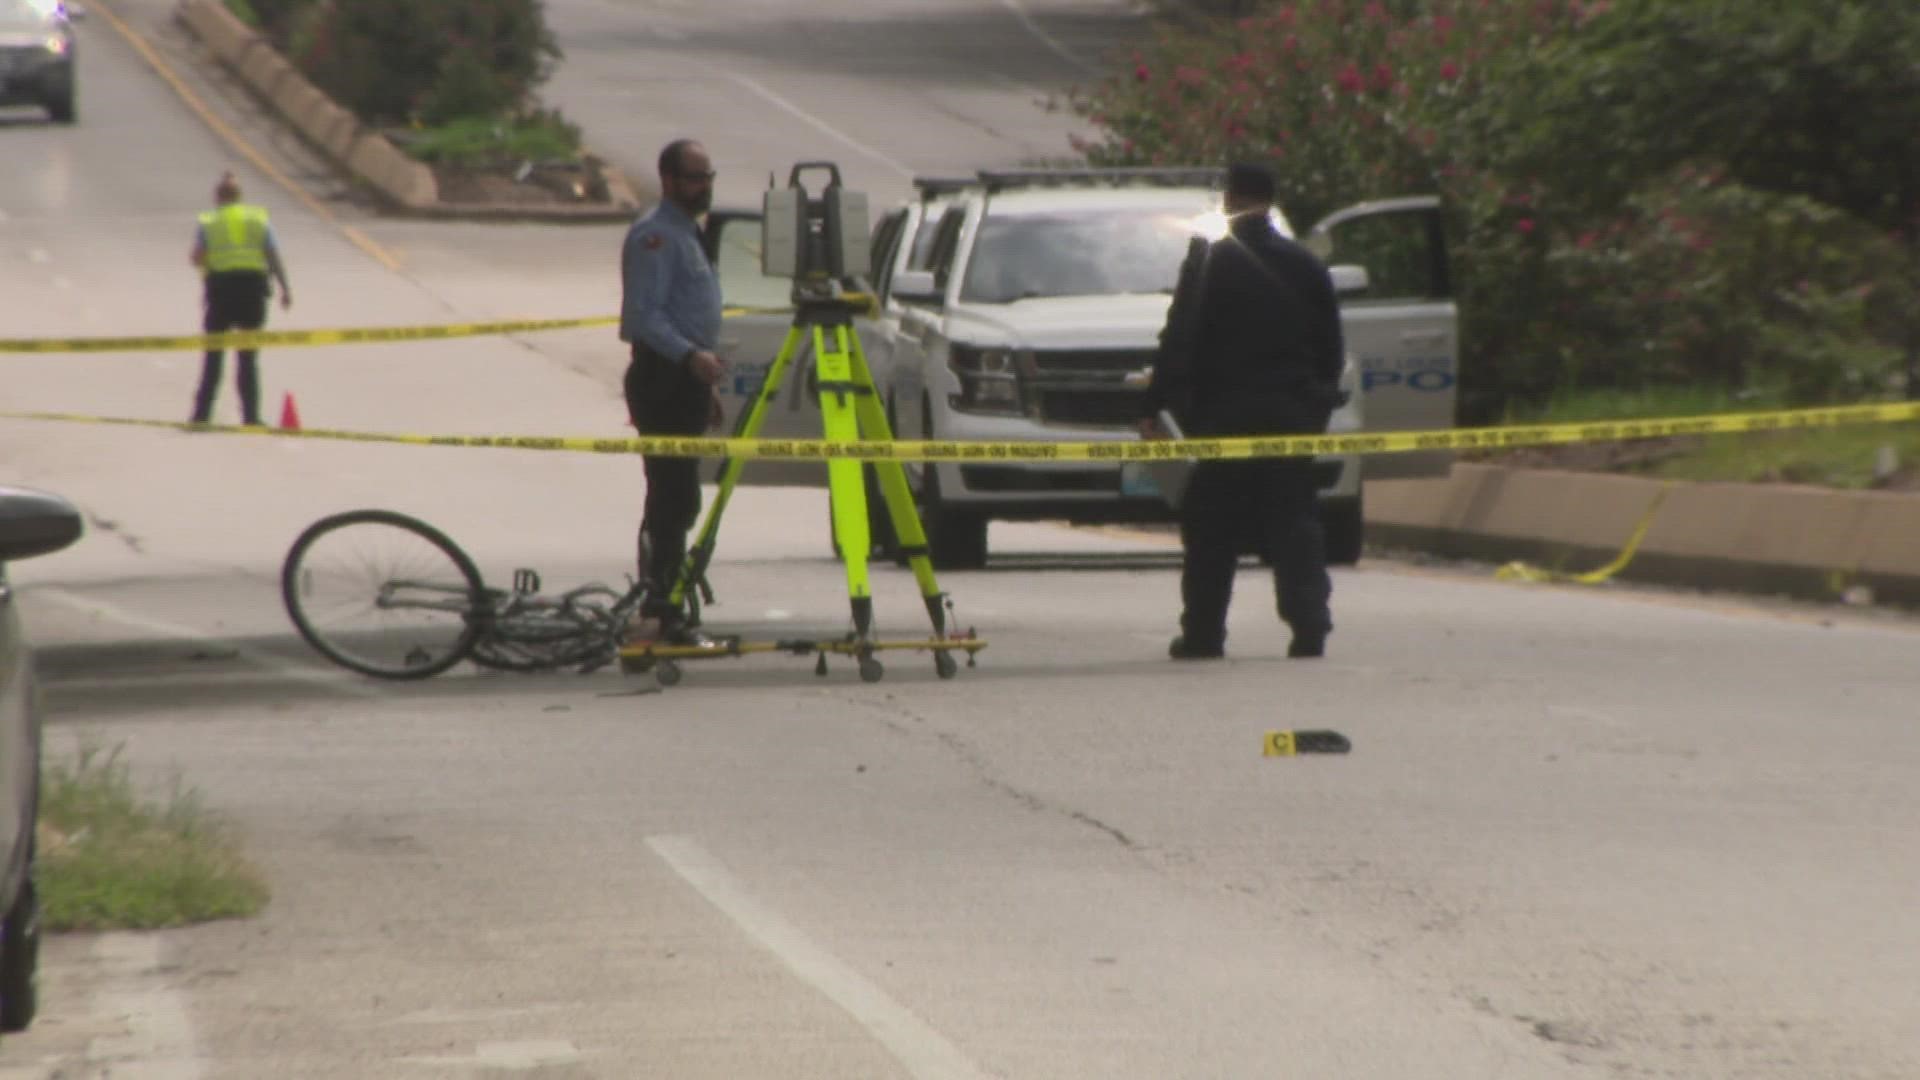 Police said the cyclist died at the hospital shortly after the crash. An accident reconstruction team is investigating.